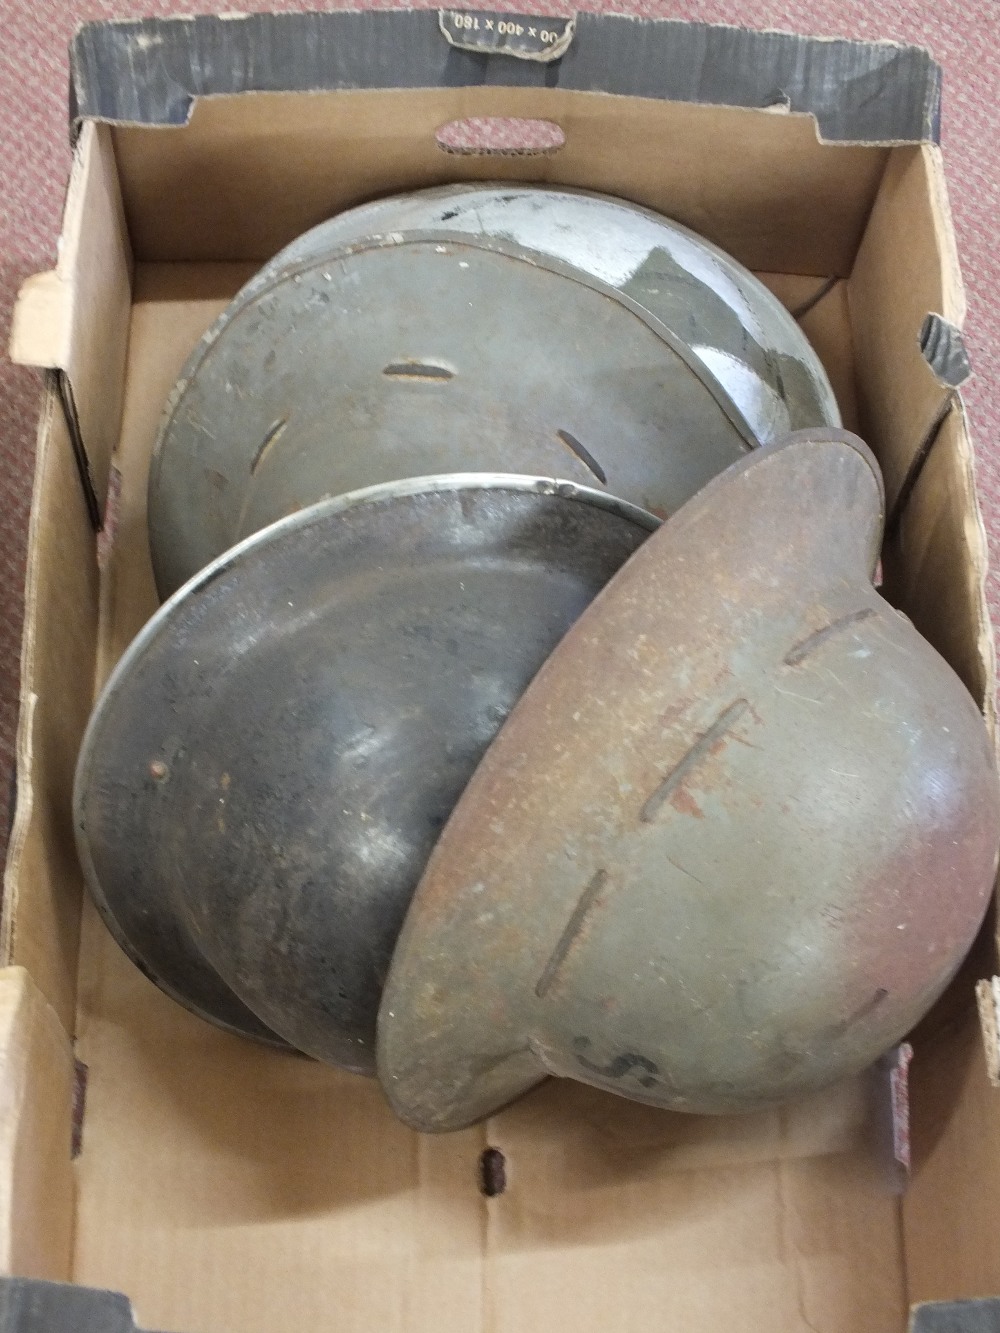 A collection of six WWII era British helmets